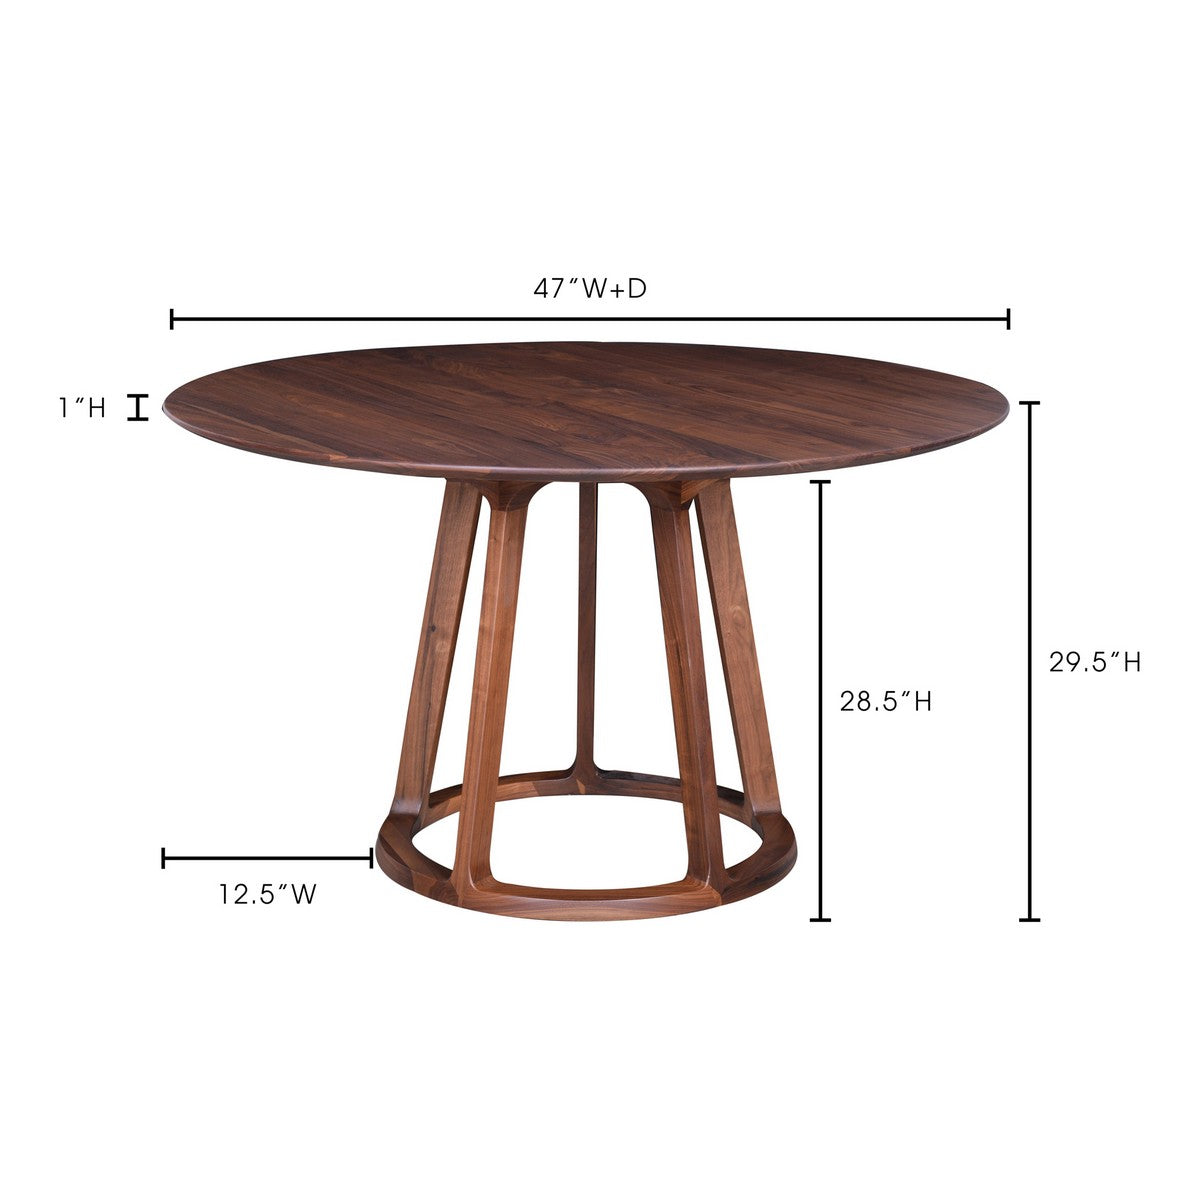 Moe's Home Collection Aldo Round Dining Table Walnut - CB-1027-03